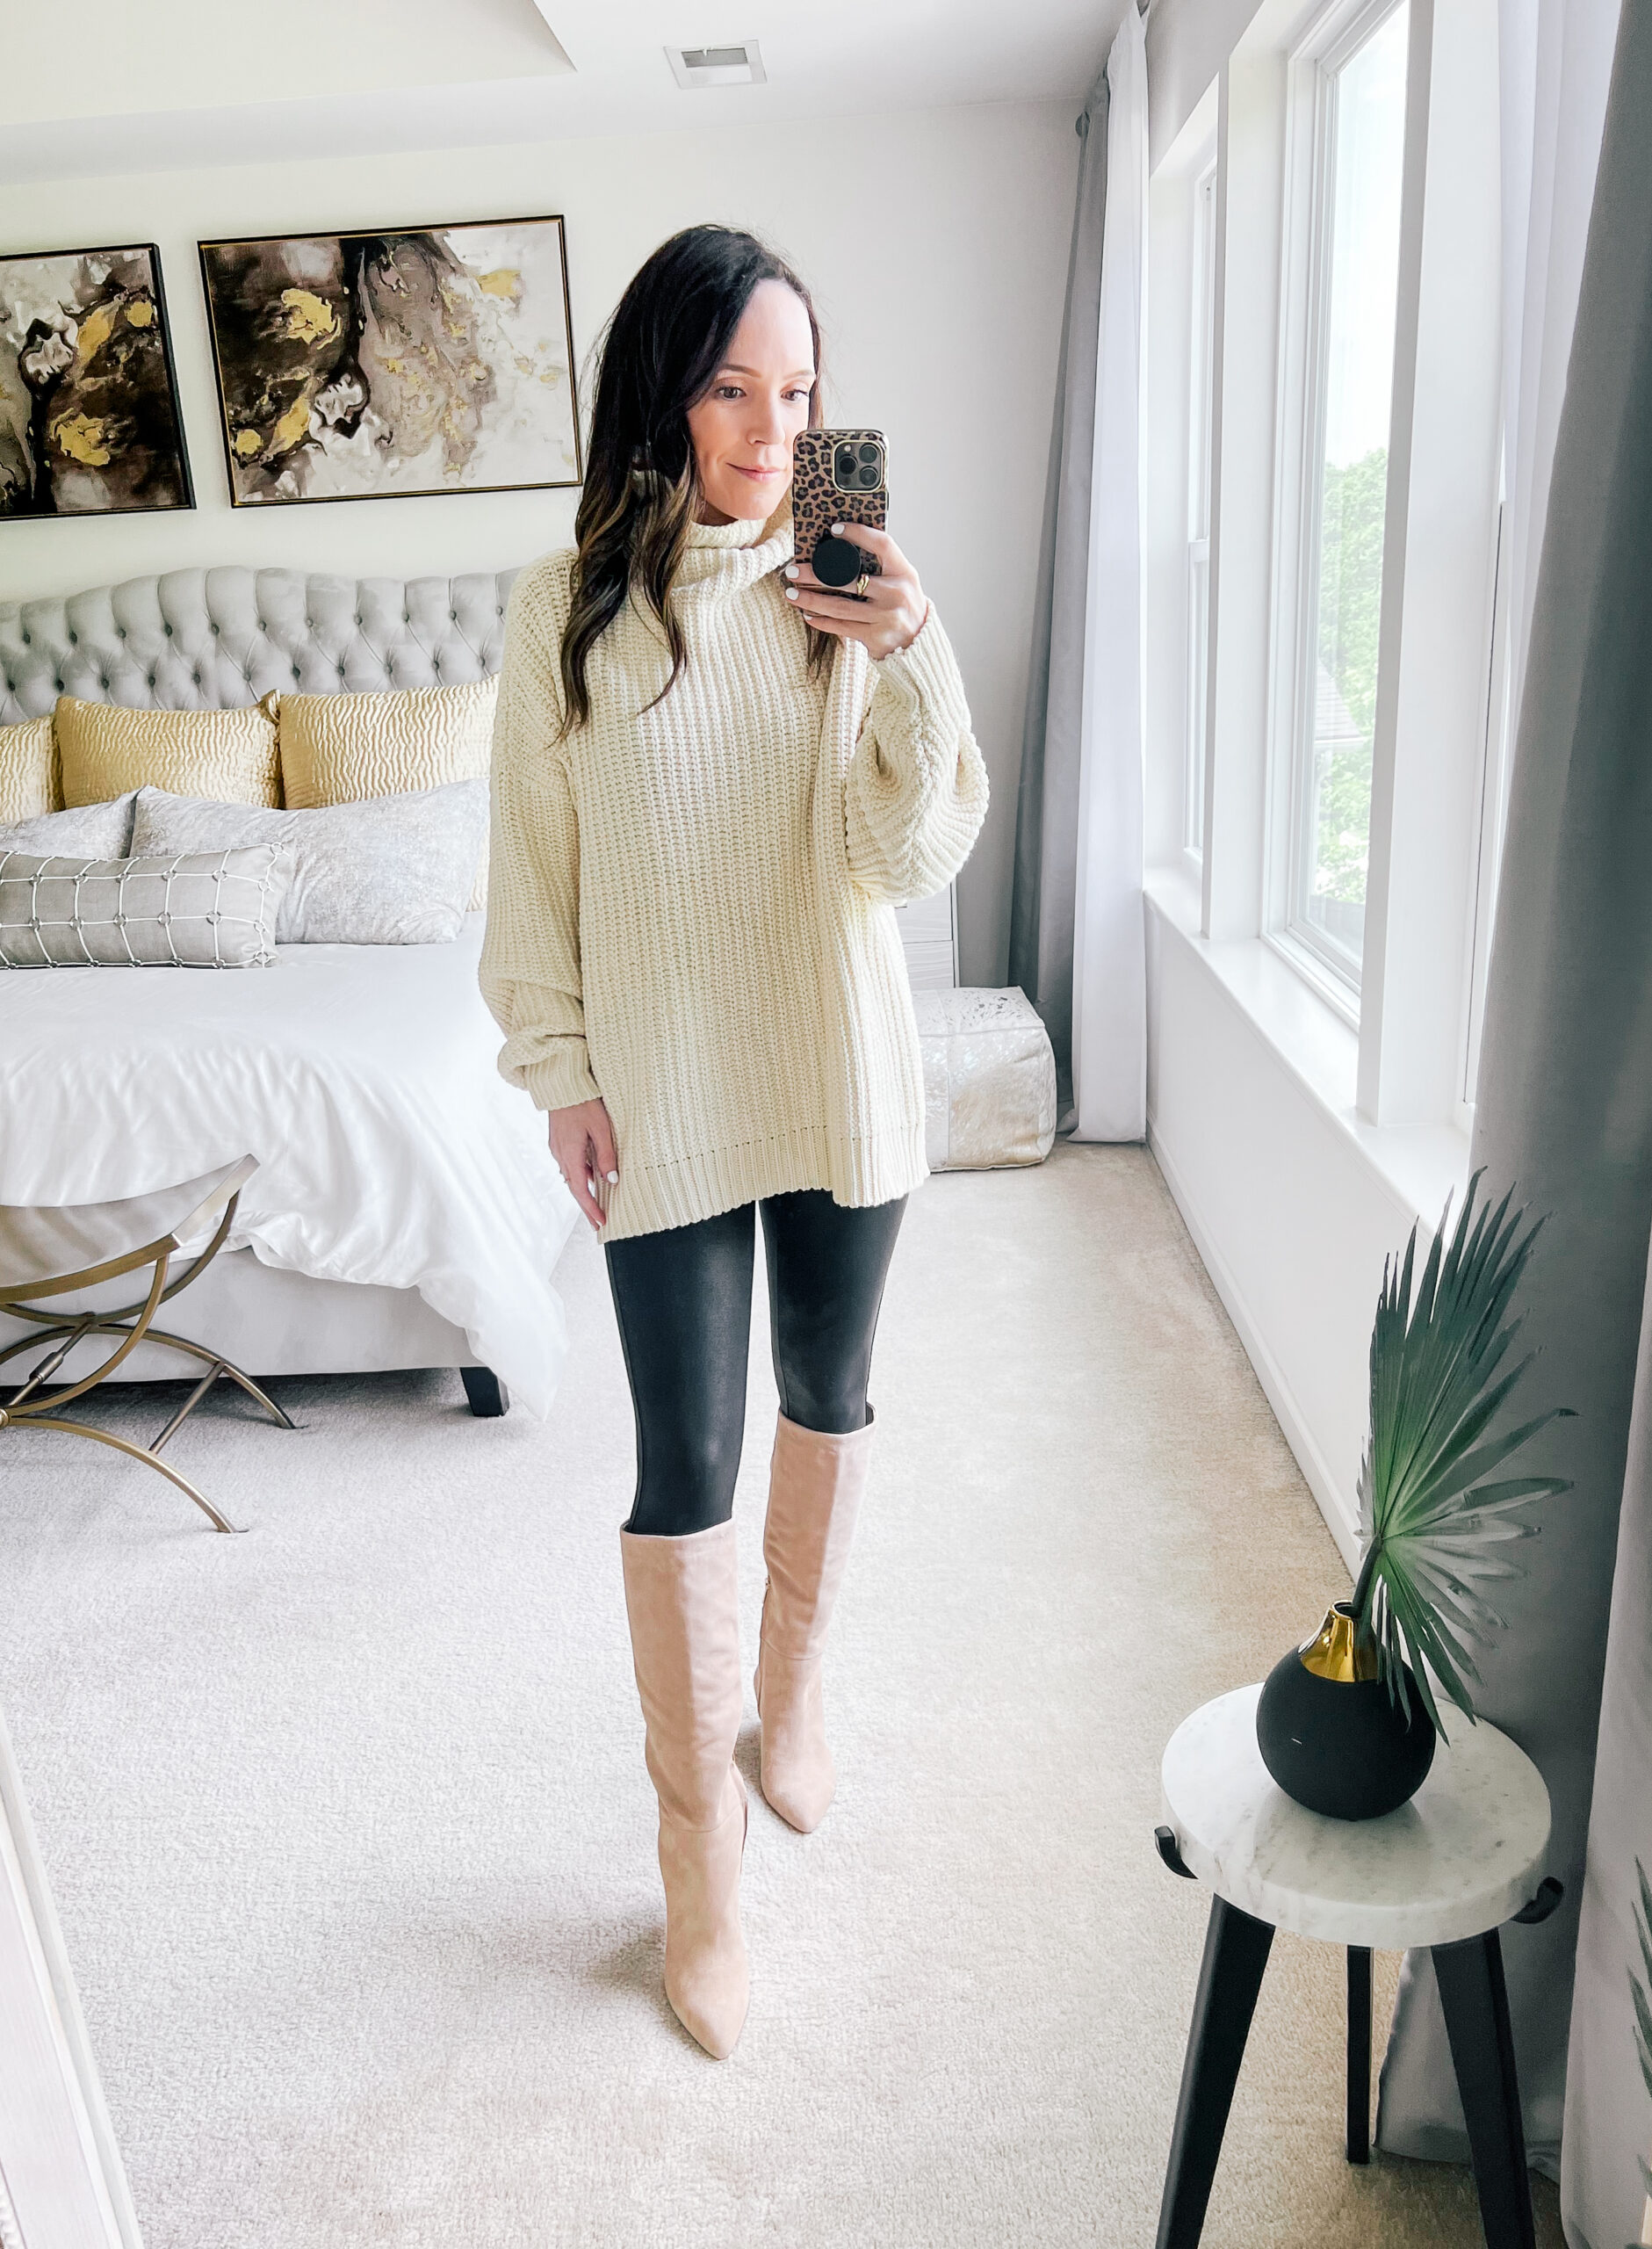 Tunic sweater and black leggings outfit